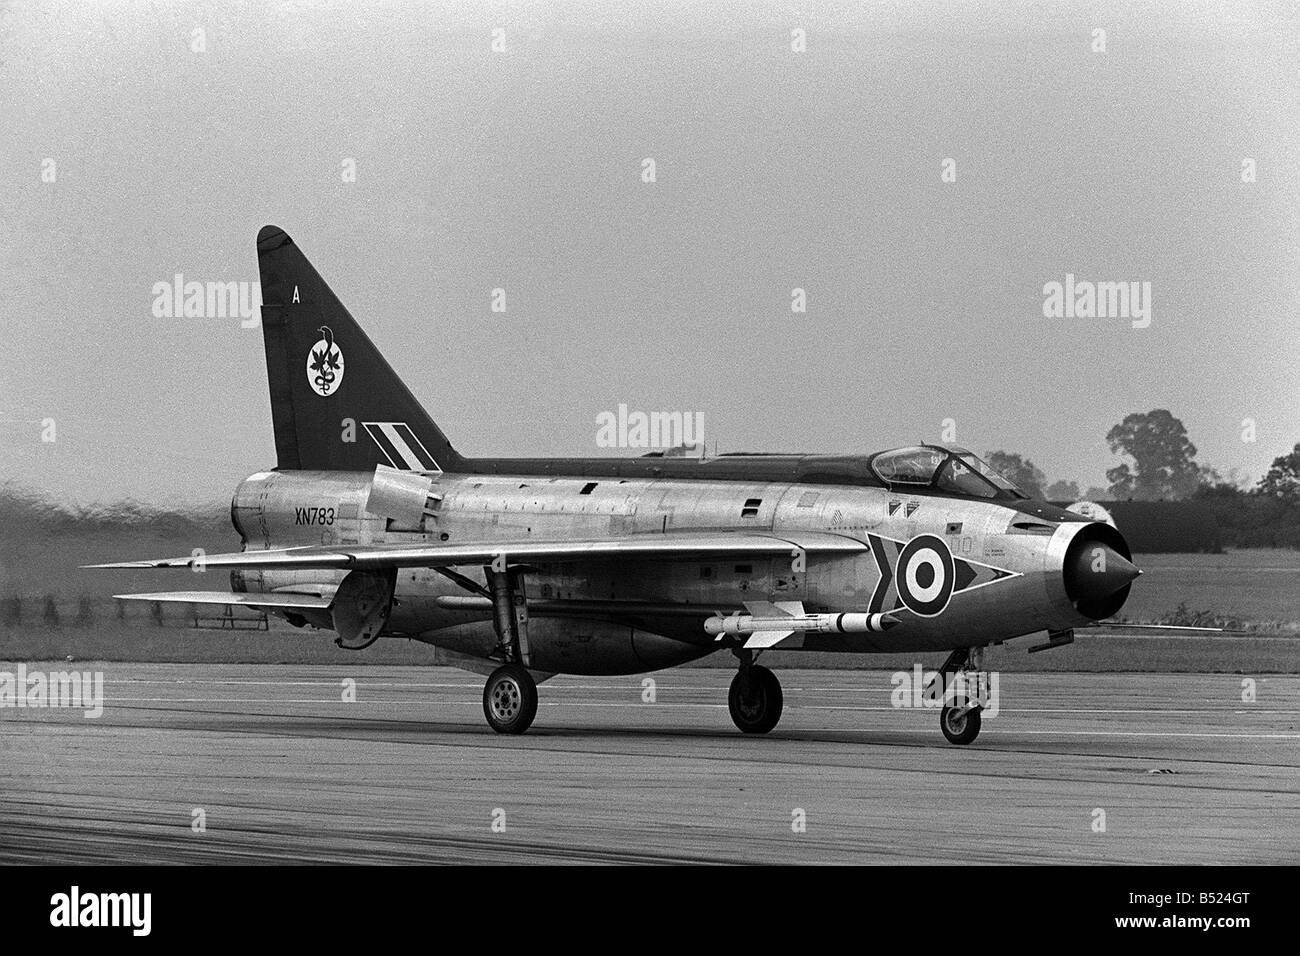 Aircraft English Electric BAC Lightning F2 August 1964 XN783 A 0f 92 Sqd RAF Royal Air Force taxiing back to its hangar at RAF Leconfield after practising formation flying for the Paris Air Show Stock Photo